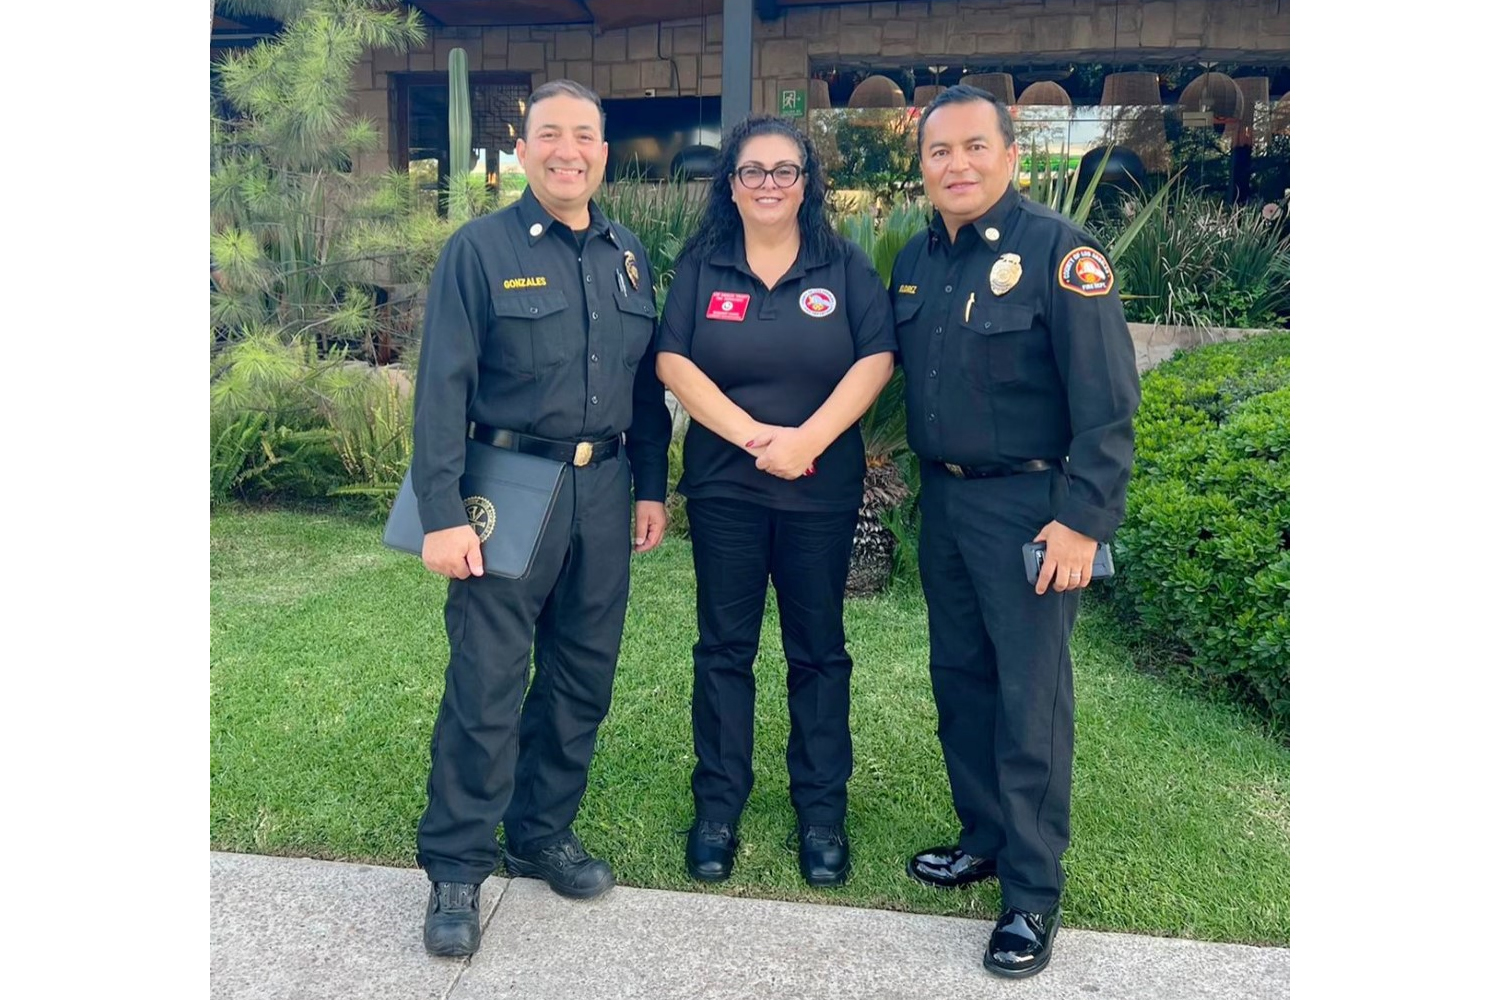 From October 17 through October 21, 2022, members of the Los Angeles County Fire Department attended the annual Mexican Fire Chief’s Association conference in Durango, Mexico.